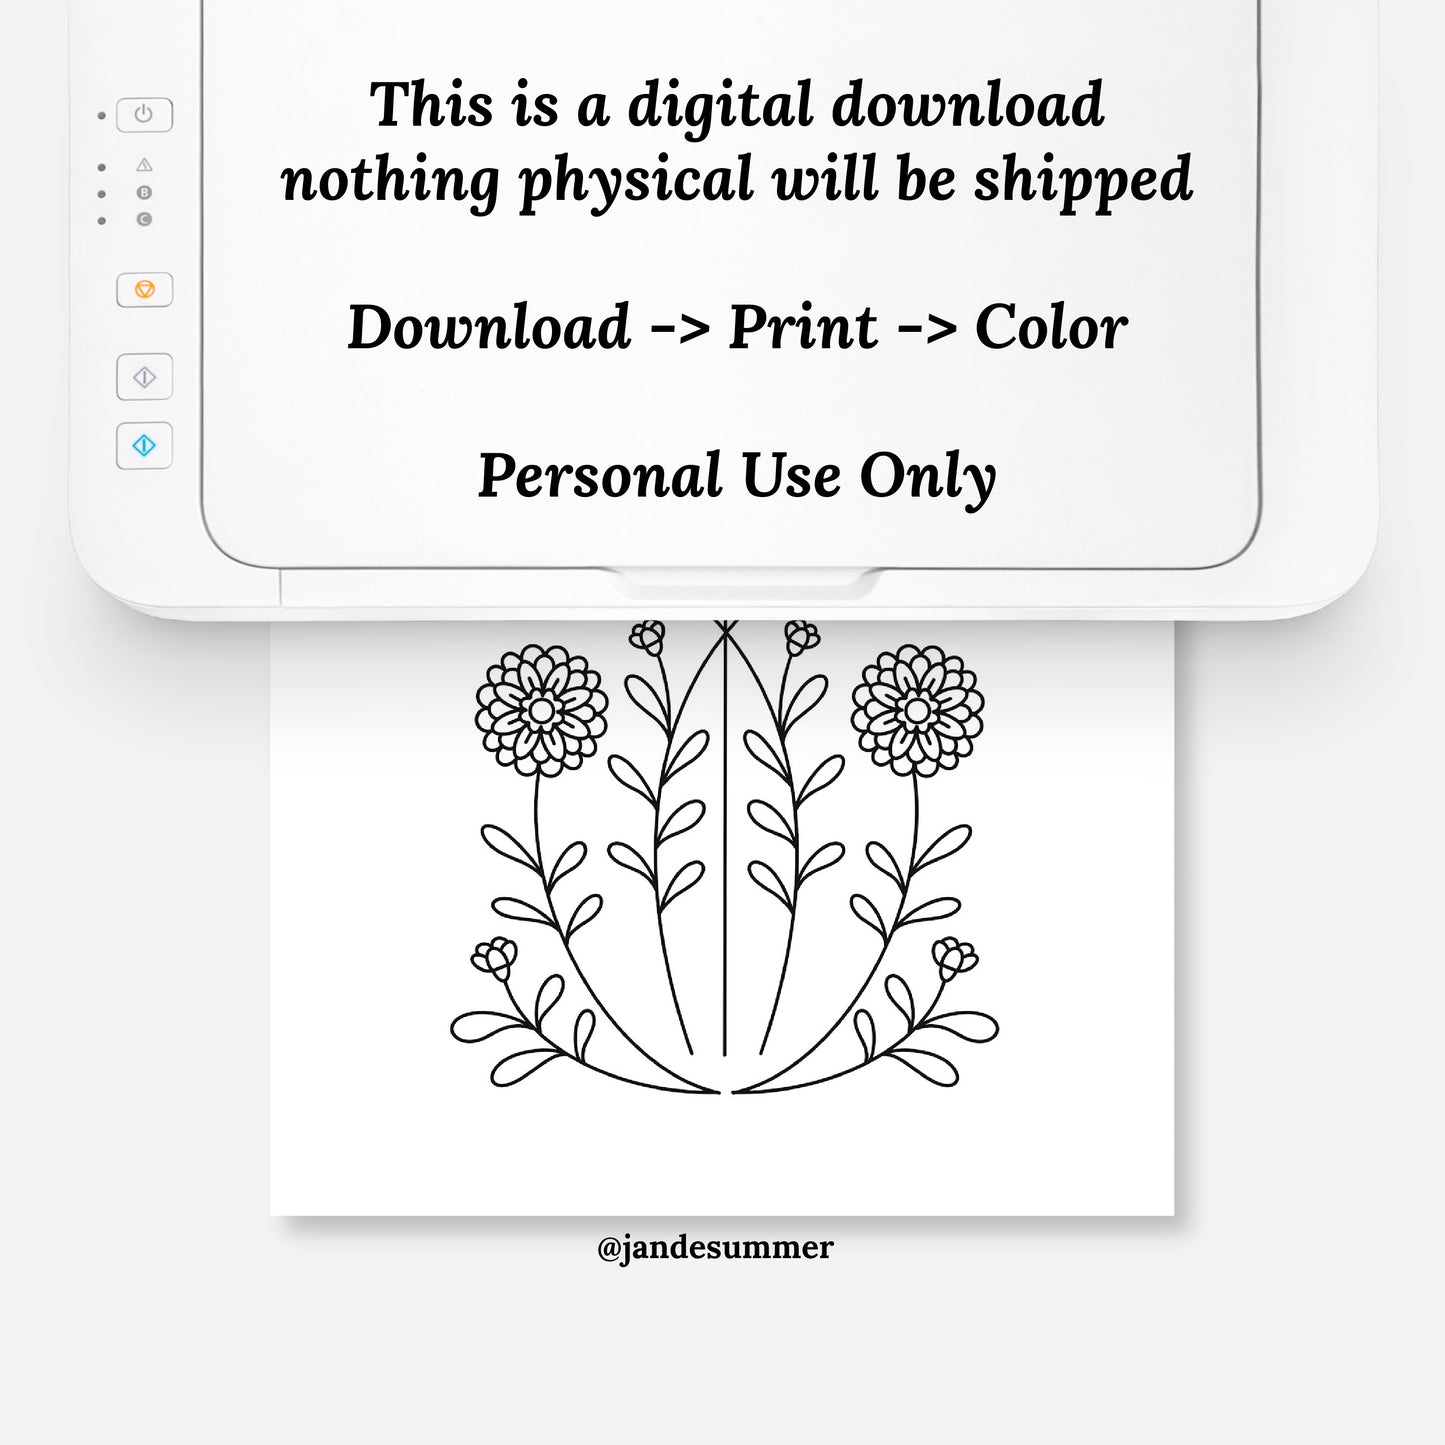 10 Pk Coloring Pages | Floral No. 3 Coloring Book Illustrations | Mindful Printable Coloring Sheets | Calming Nature Doodles